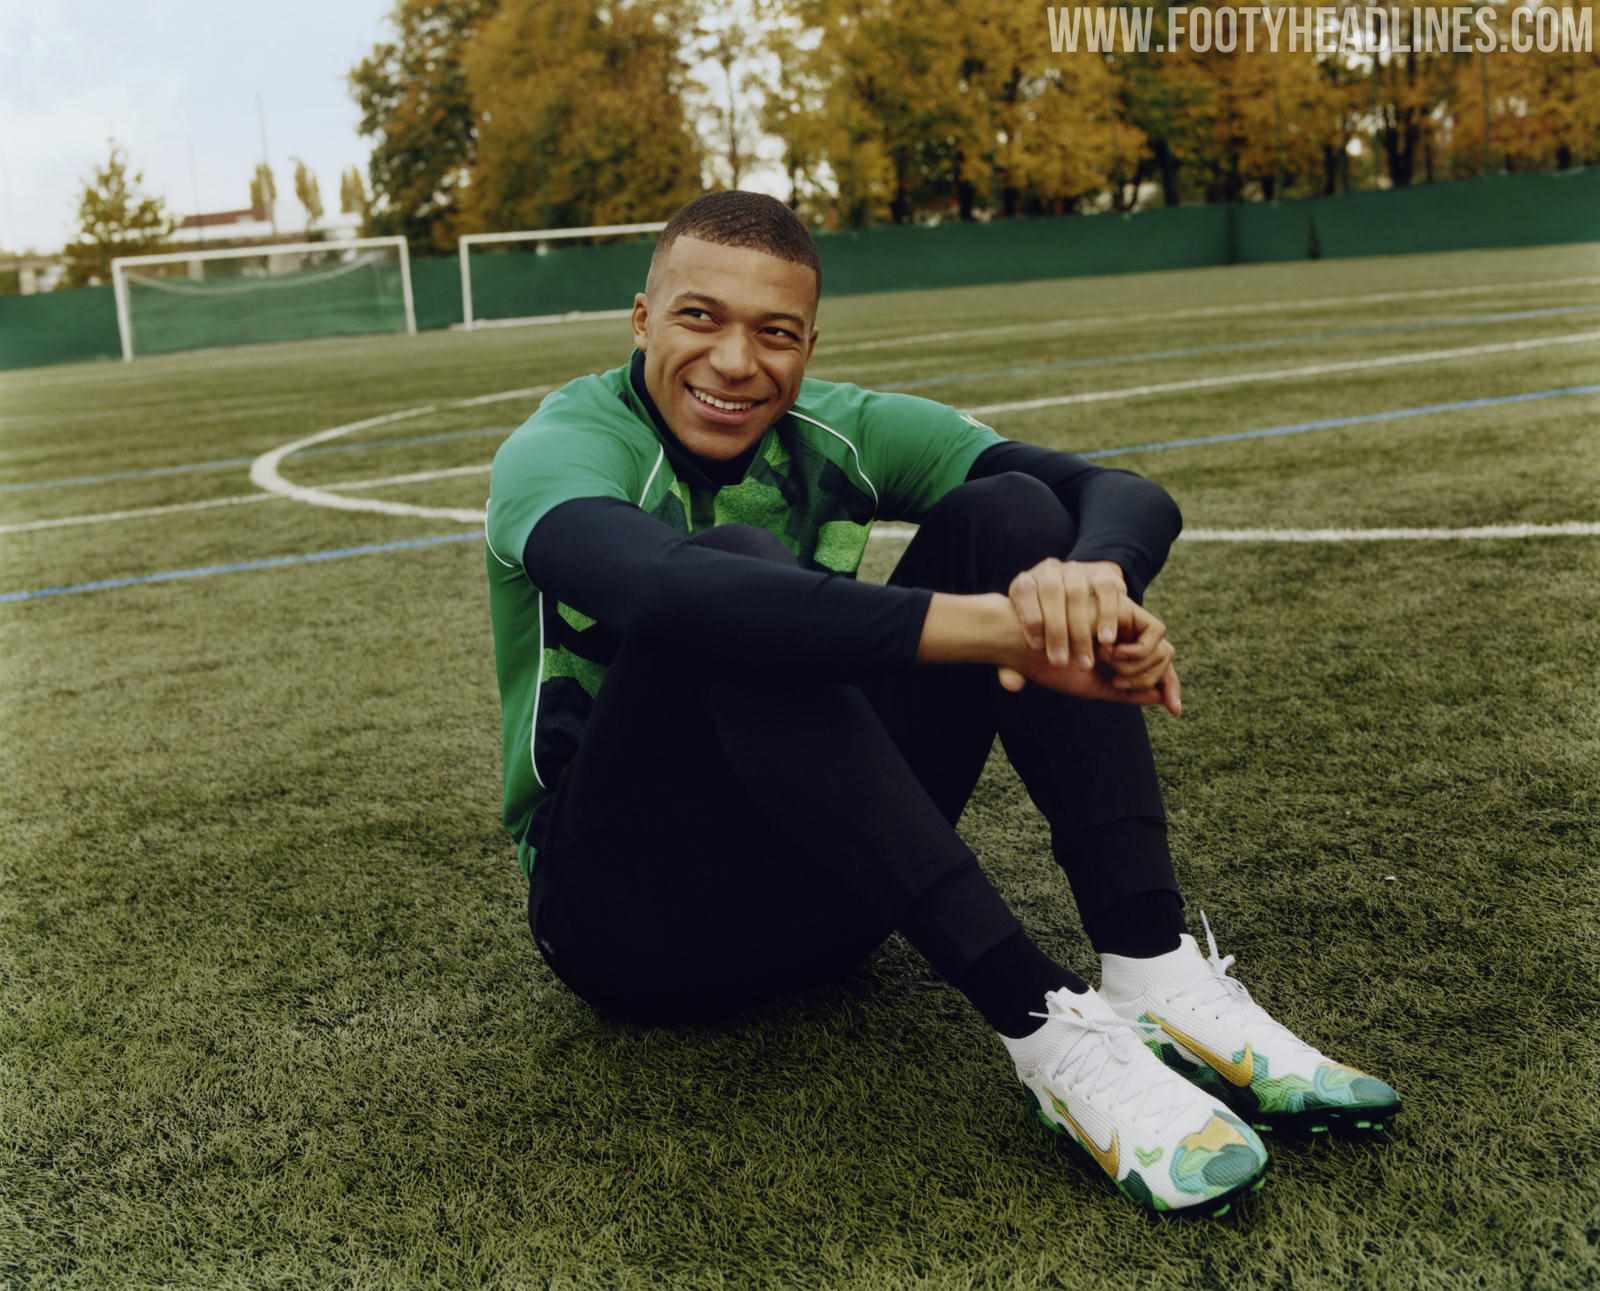 Sell Nike Mercurial Superfly Mbappe 'Bondy Dreams' Boots Released ...